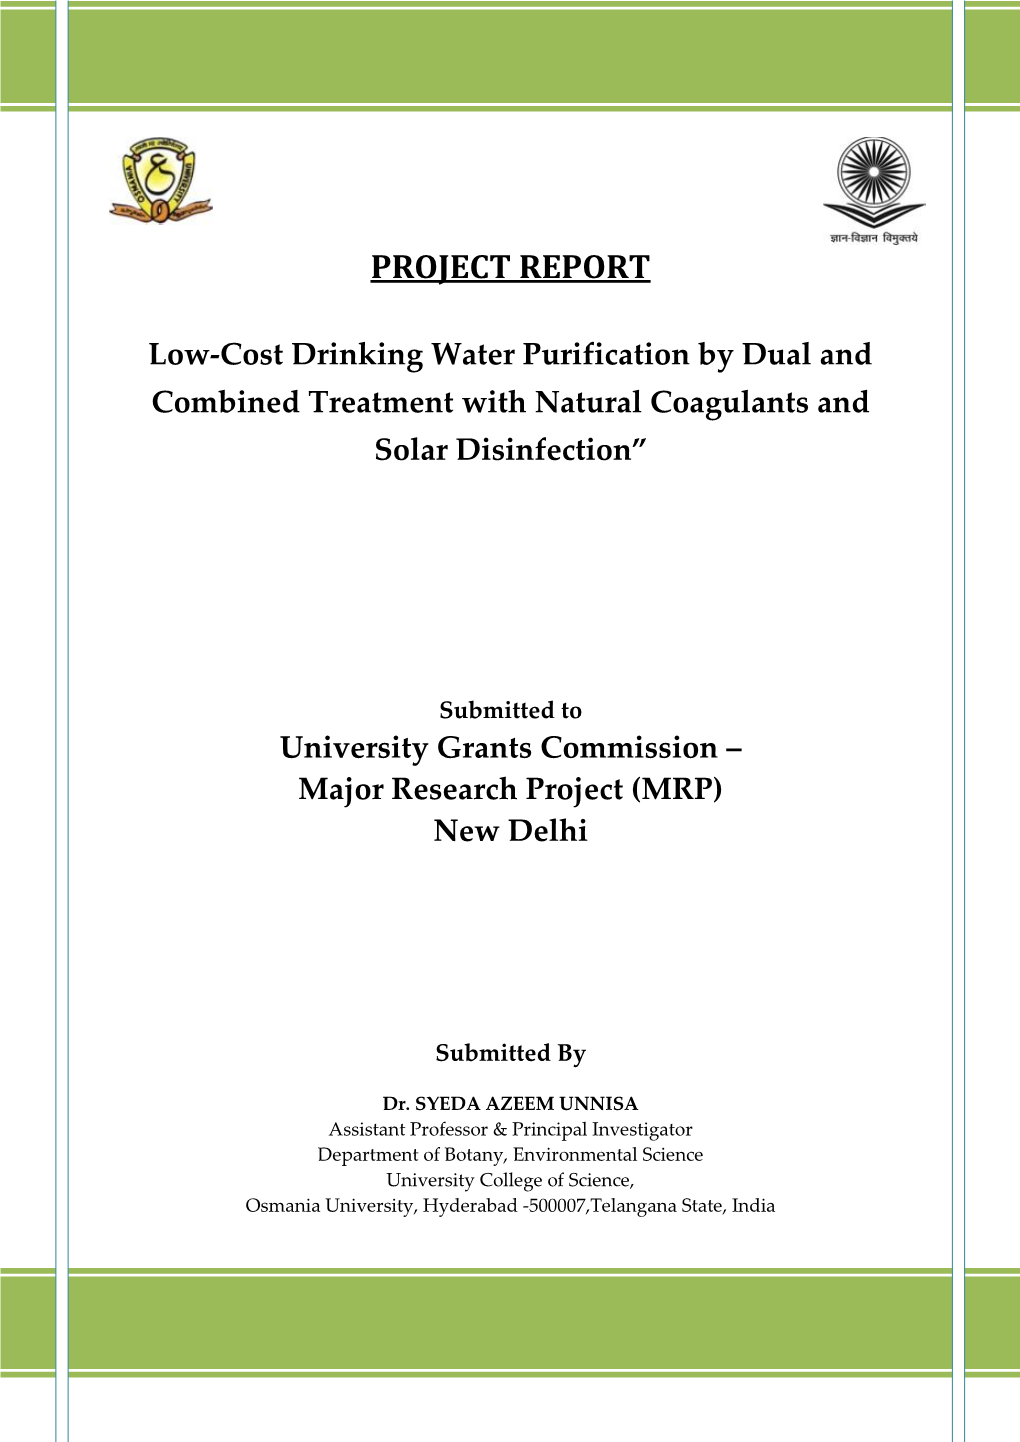 Project Report on Low-Cost Drinking Water Purification by Dual and Combined Treatment with Natural Coagulants